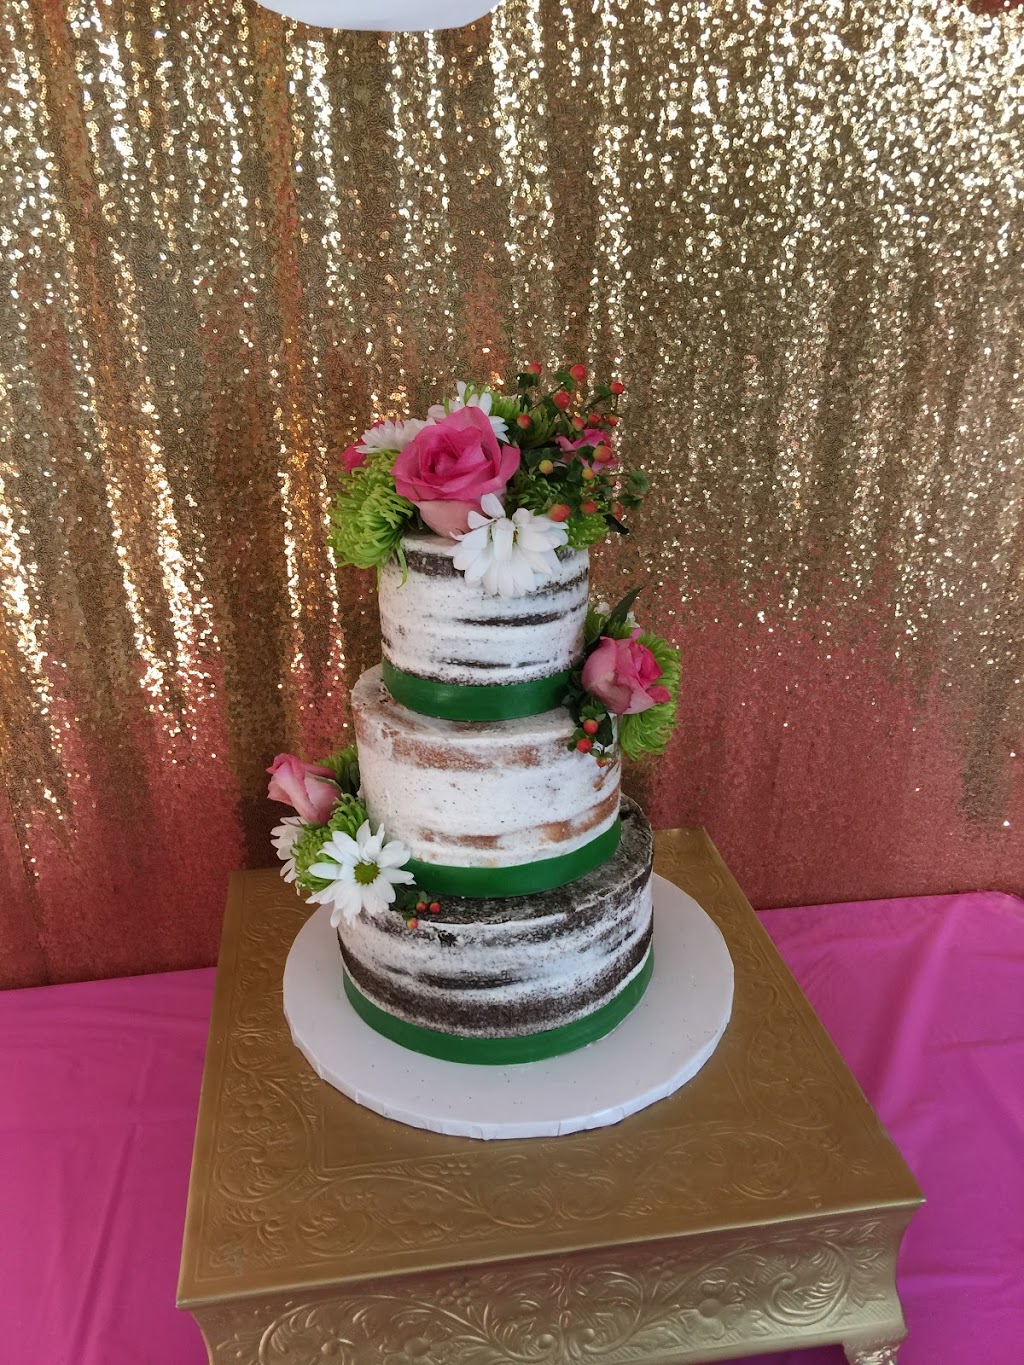 Sweet Designs Specialty Cakes | 7514 E Main St, Reynoldsburg, OH 43068 | Phone: (614) 327-0325